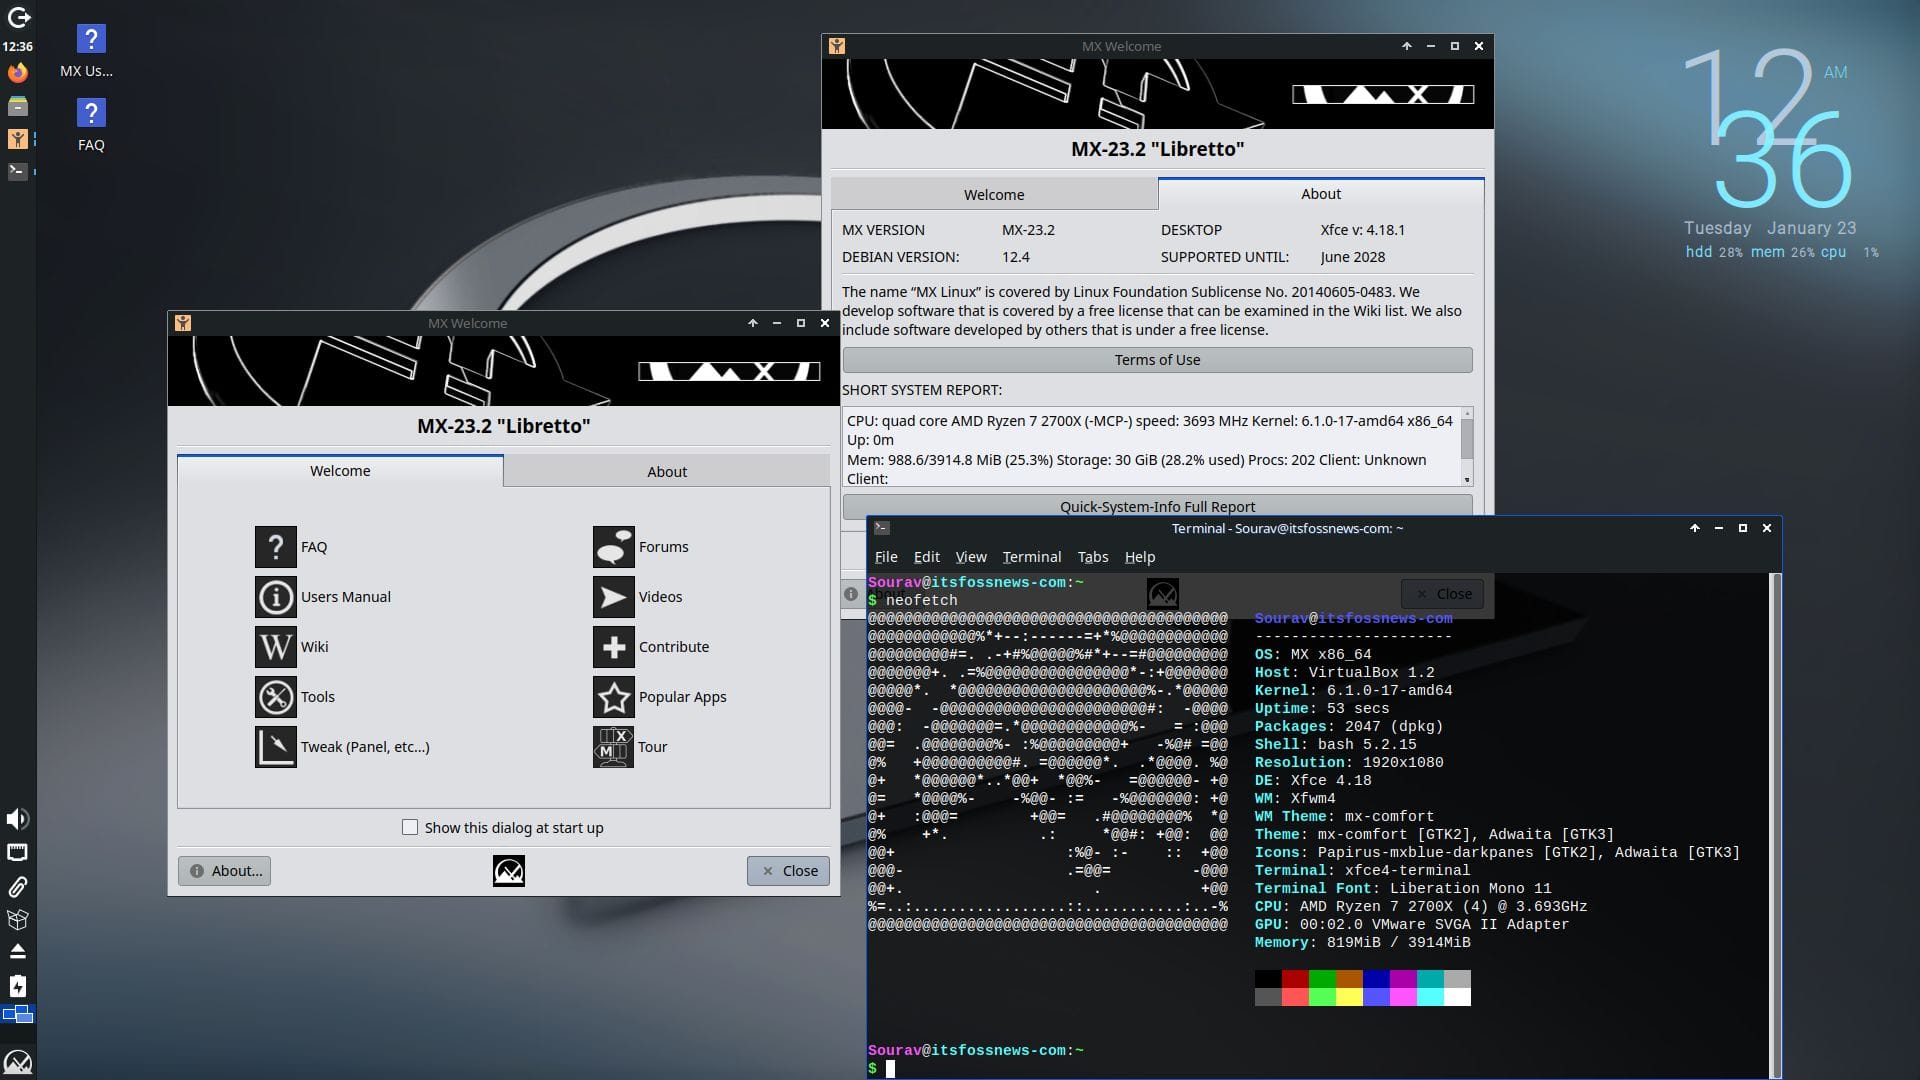 a screenshot of mx linux 23.2 with a neofetch output welcome app and about mx linux app open on the desktop screen